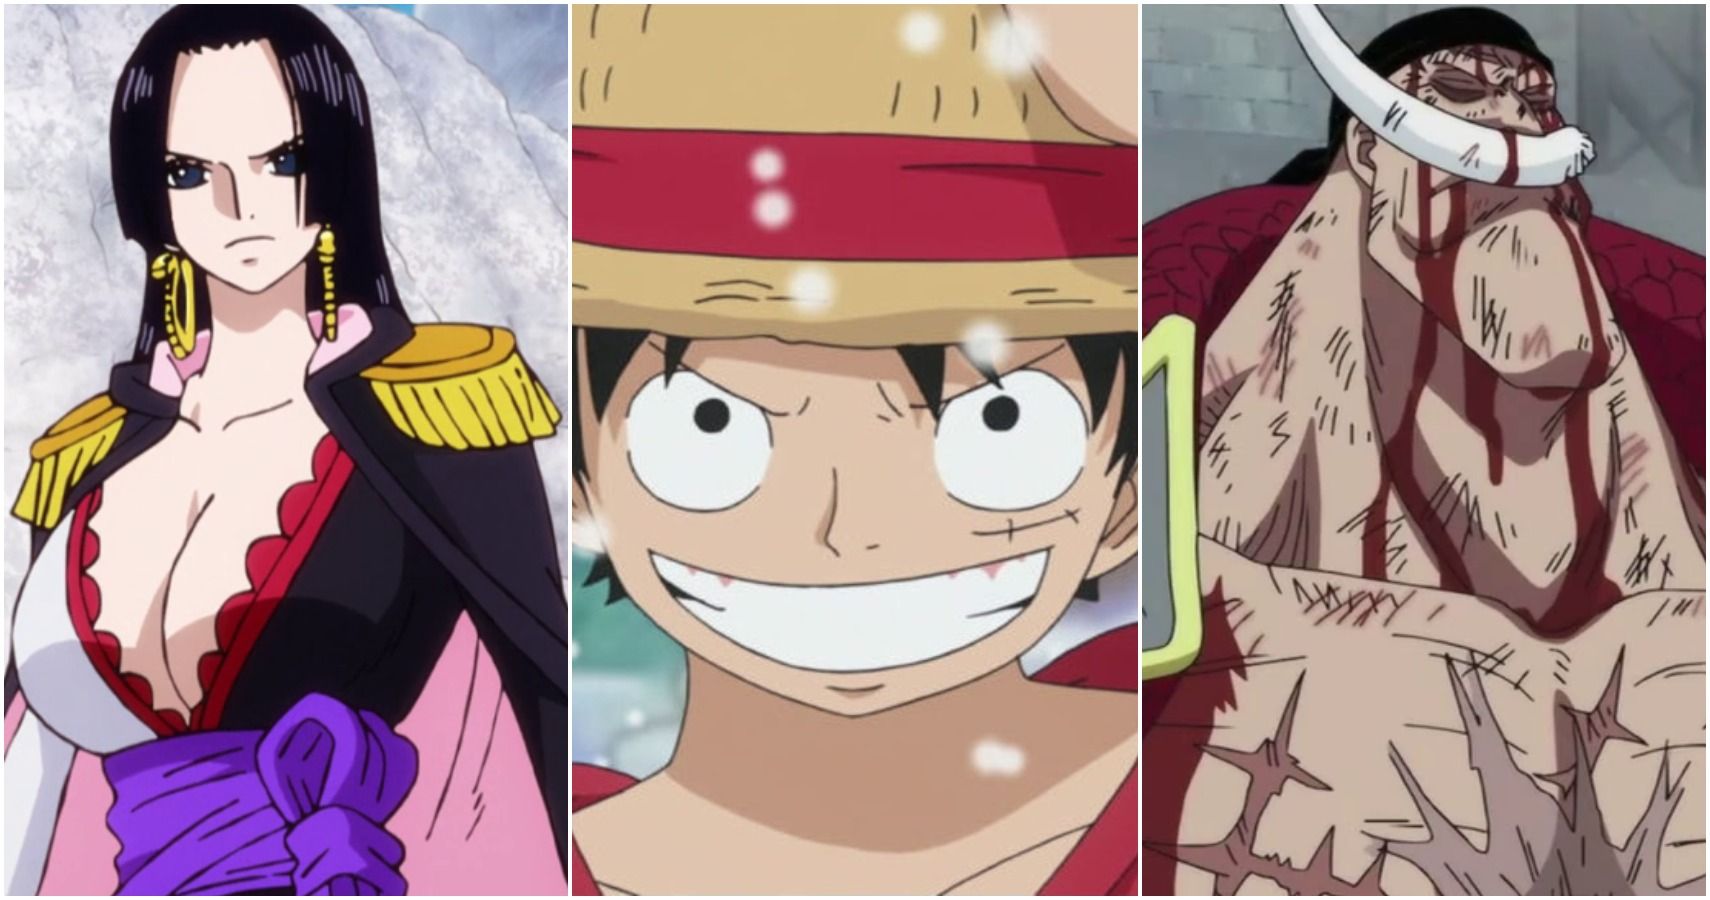 Who are currently the top 5 strongest characters in One Piece